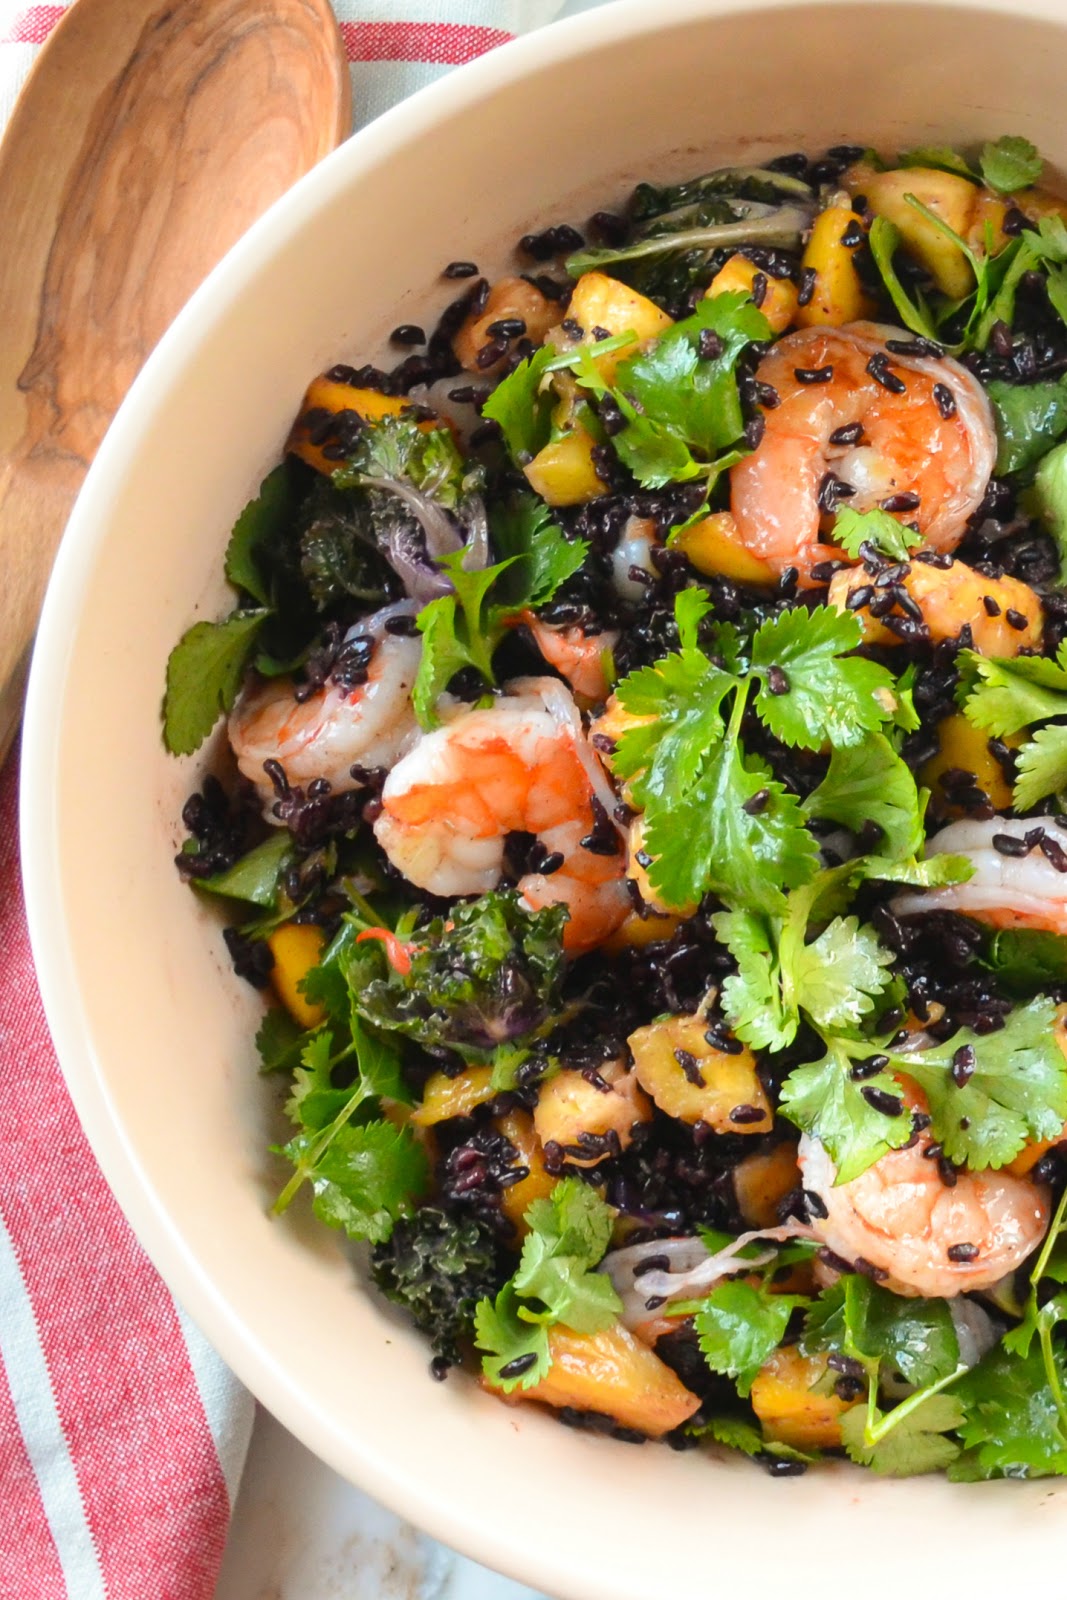 Asian Shrimp Mango Black Rice Salad with pineapple, kale, and cilantro from Serena Bakes Simply From Scratch.